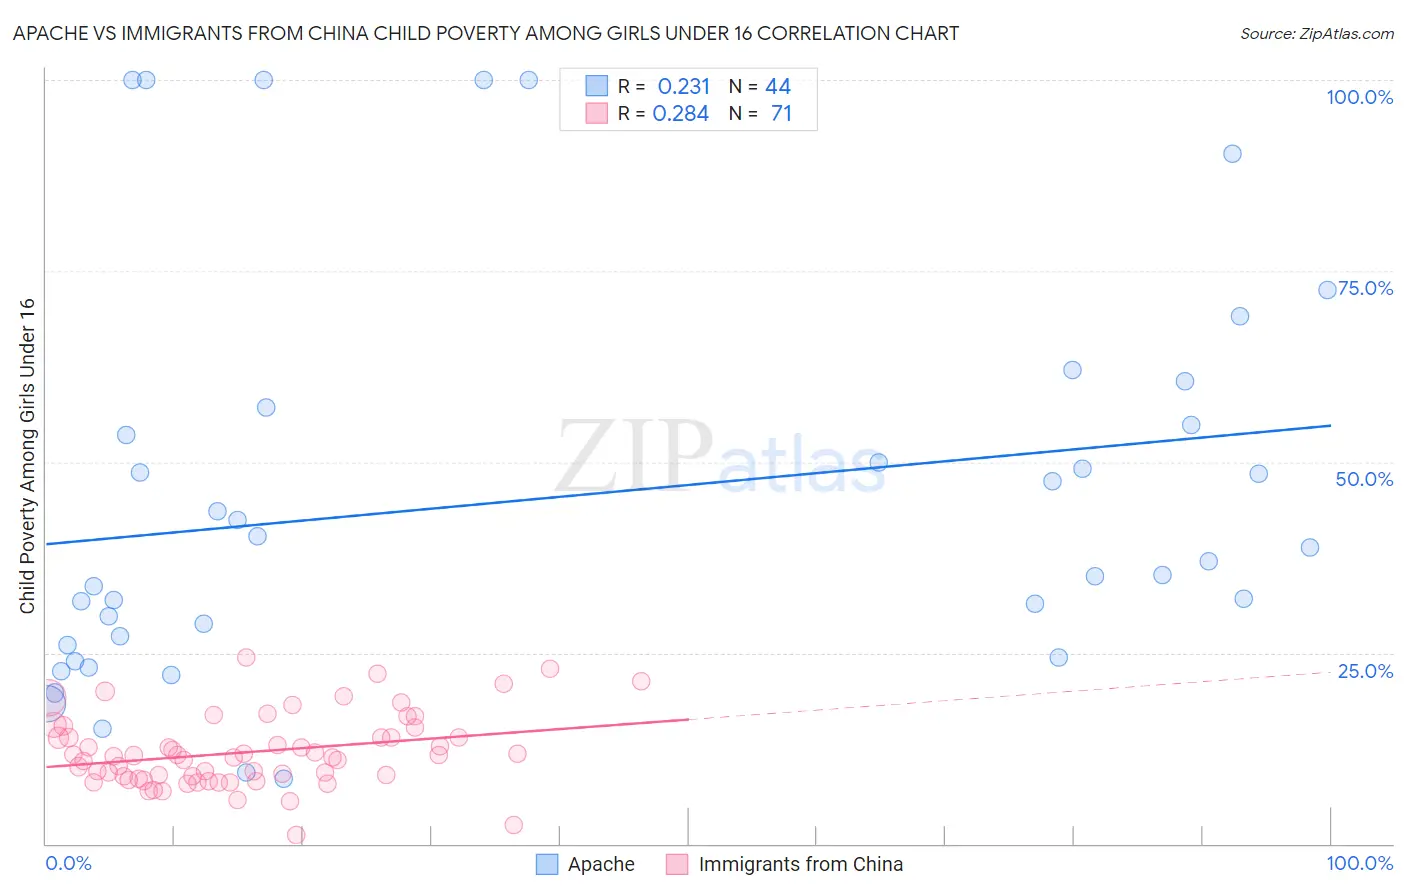 Apache vs Immigrants from China Child Poverty Among Girls Under 16